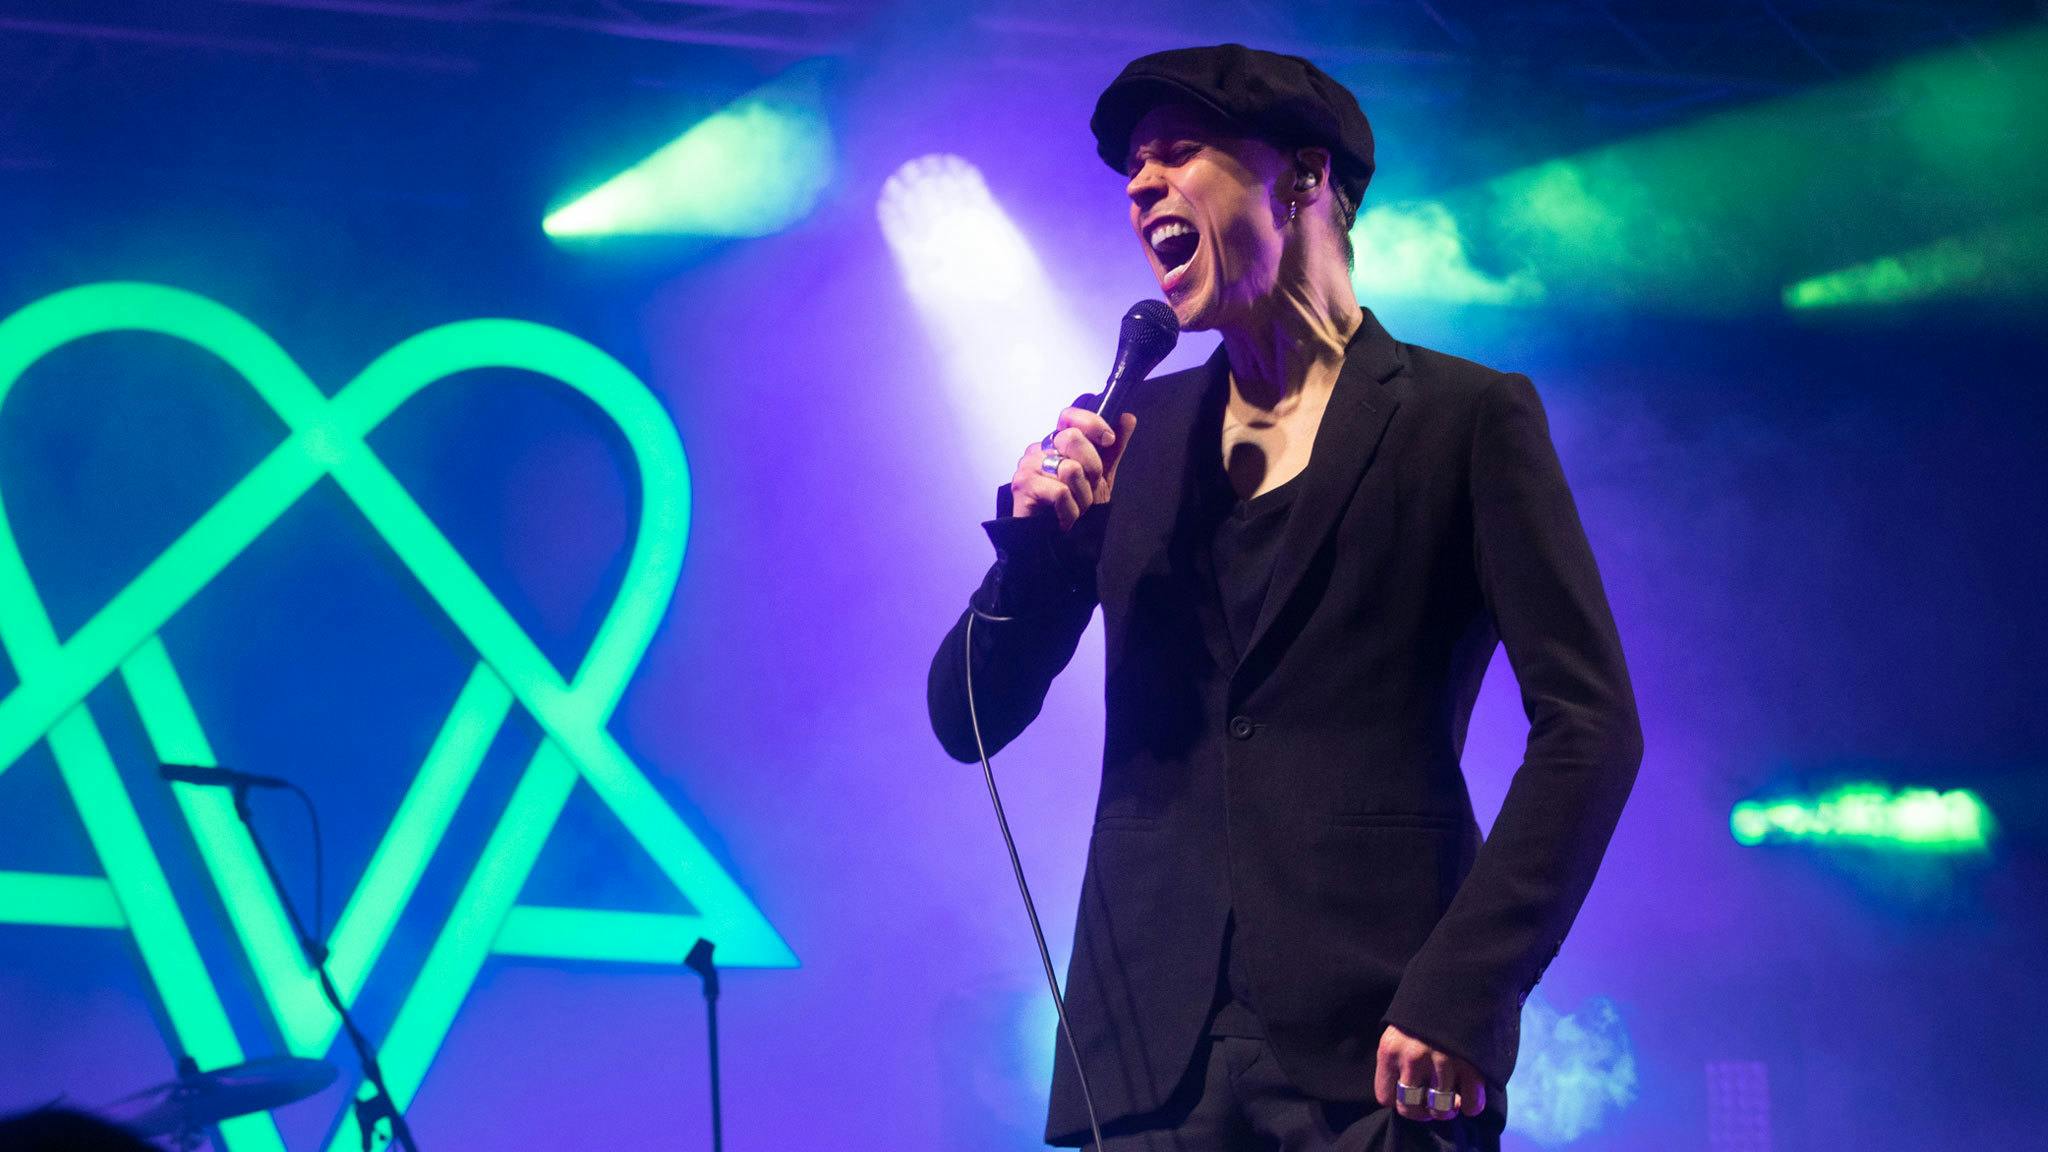 Ville Valo to bring Neon Noir cycle to an end with massive world tour